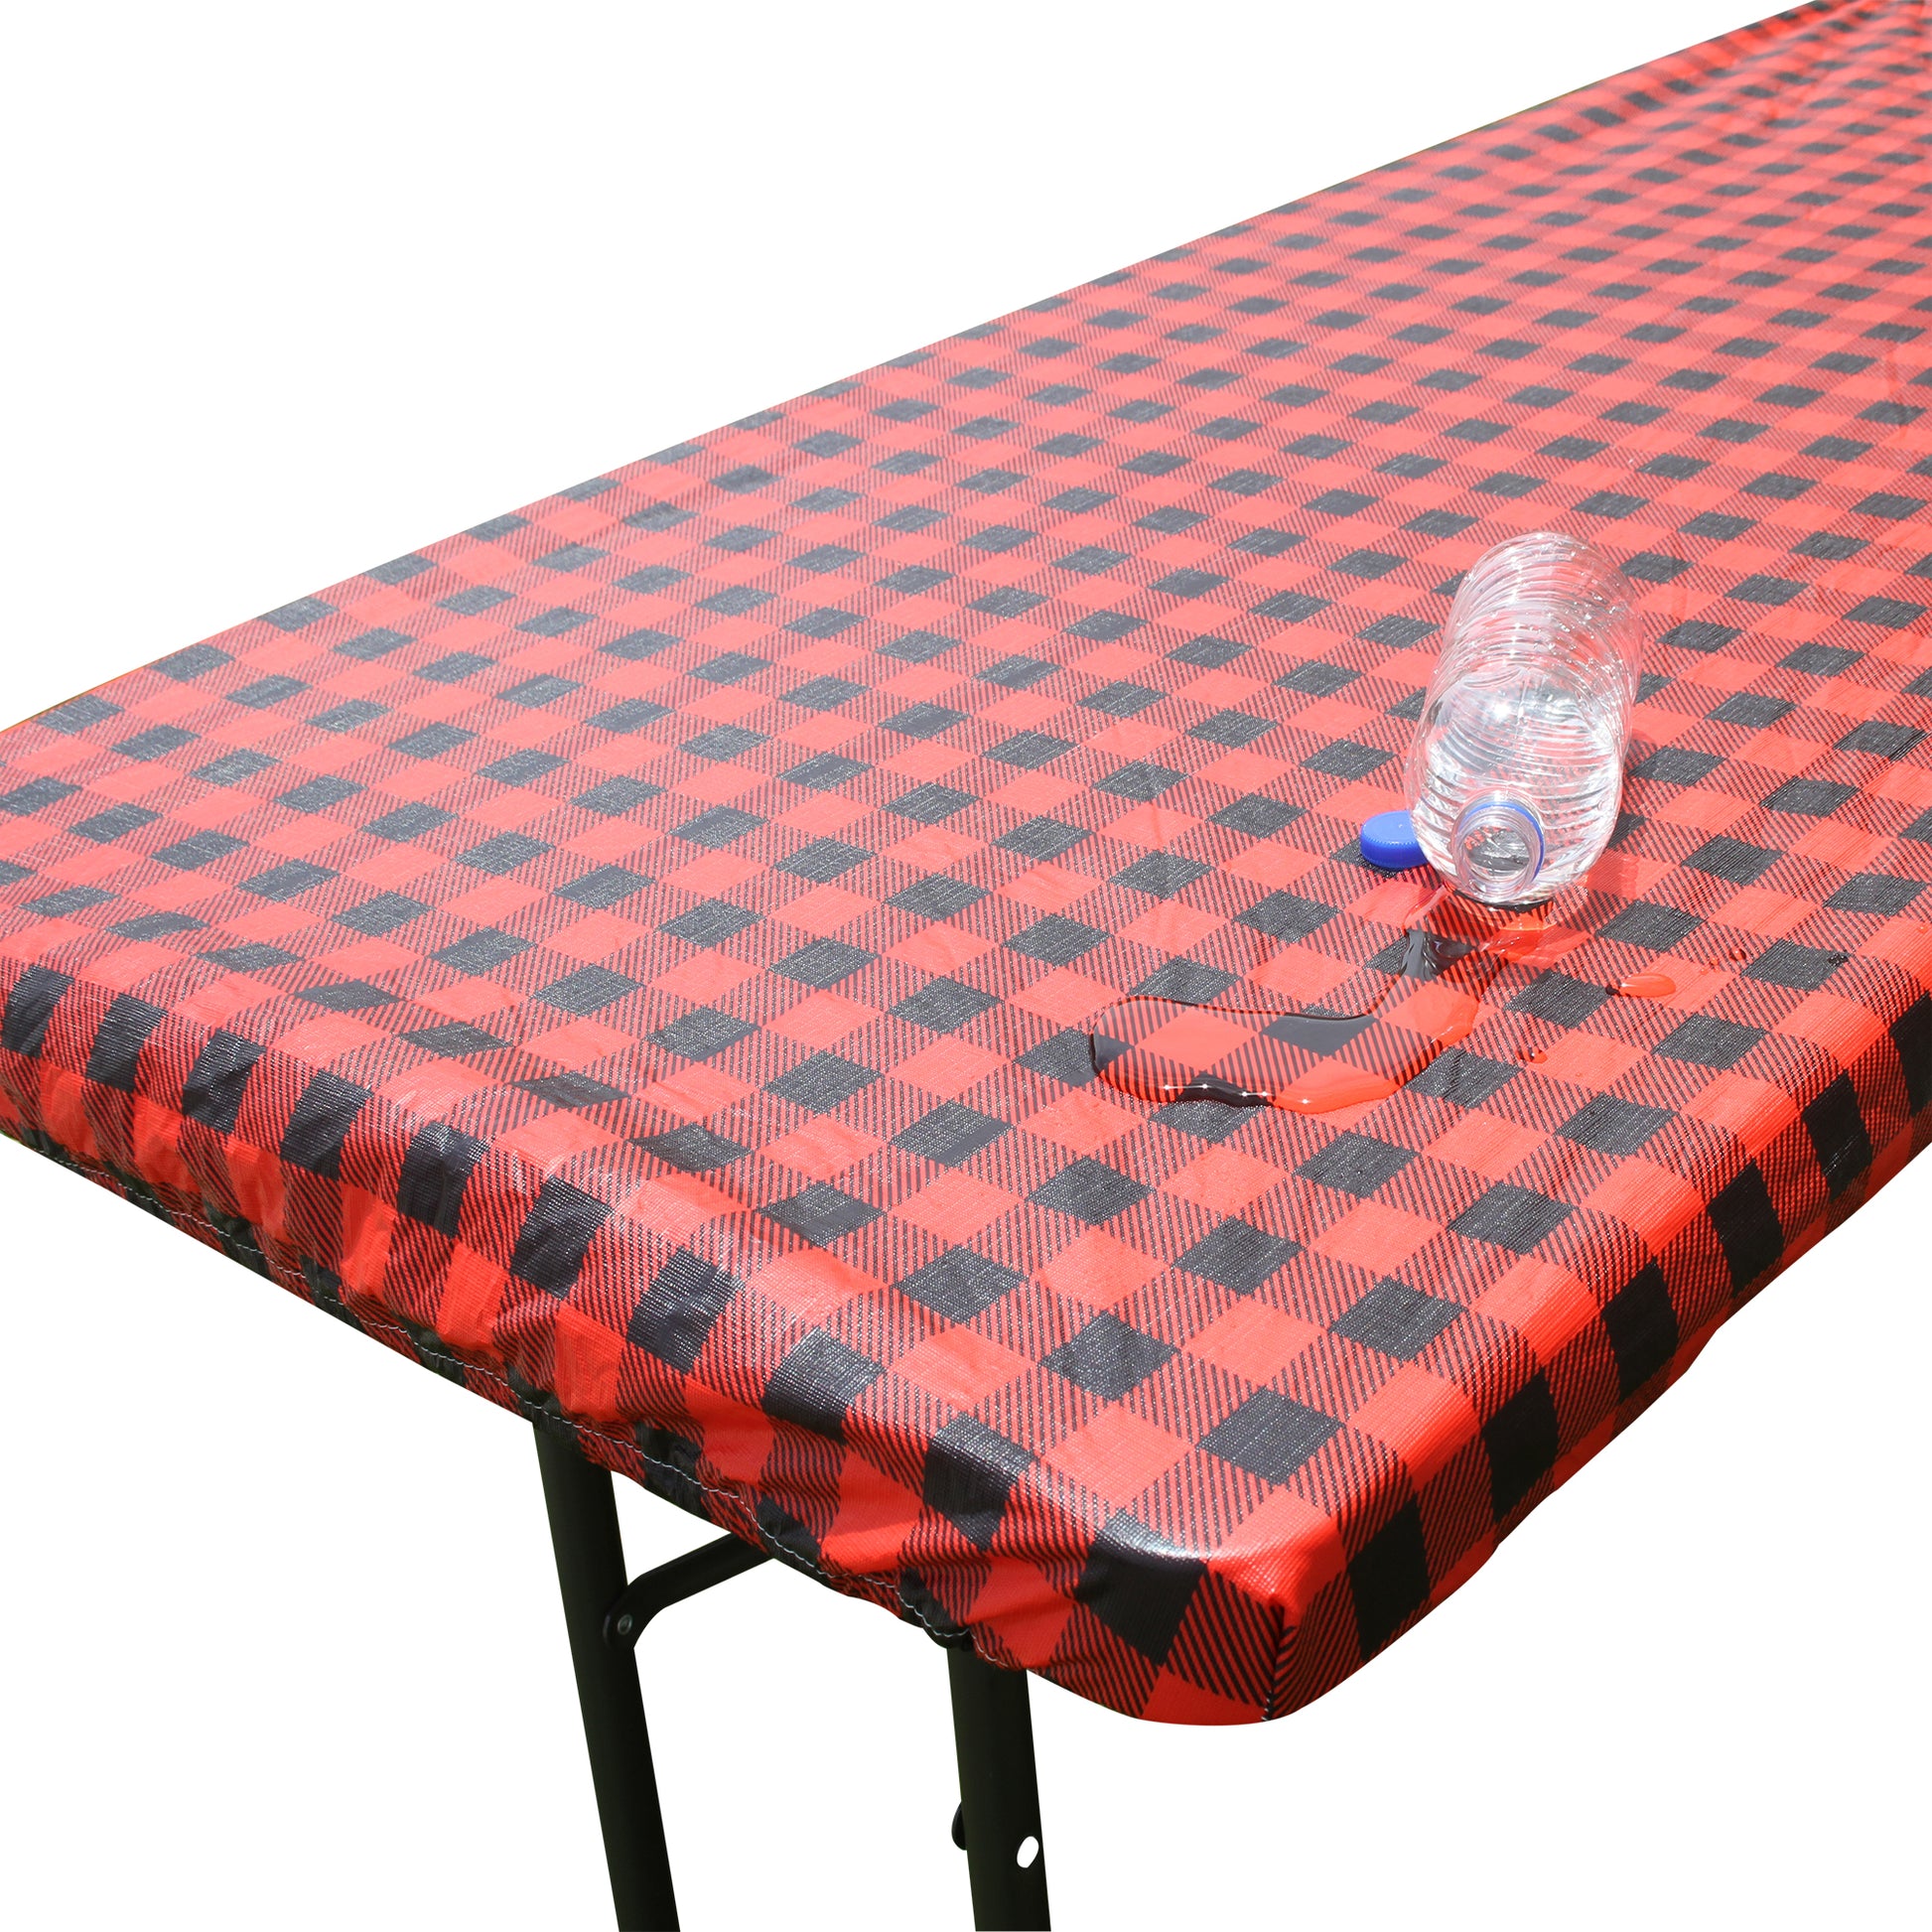 Image of TableCloth PLUS 96" Checkerboard Black and Red Fitted PEVA Vinyl Tablecloth for 8' Folding Tables